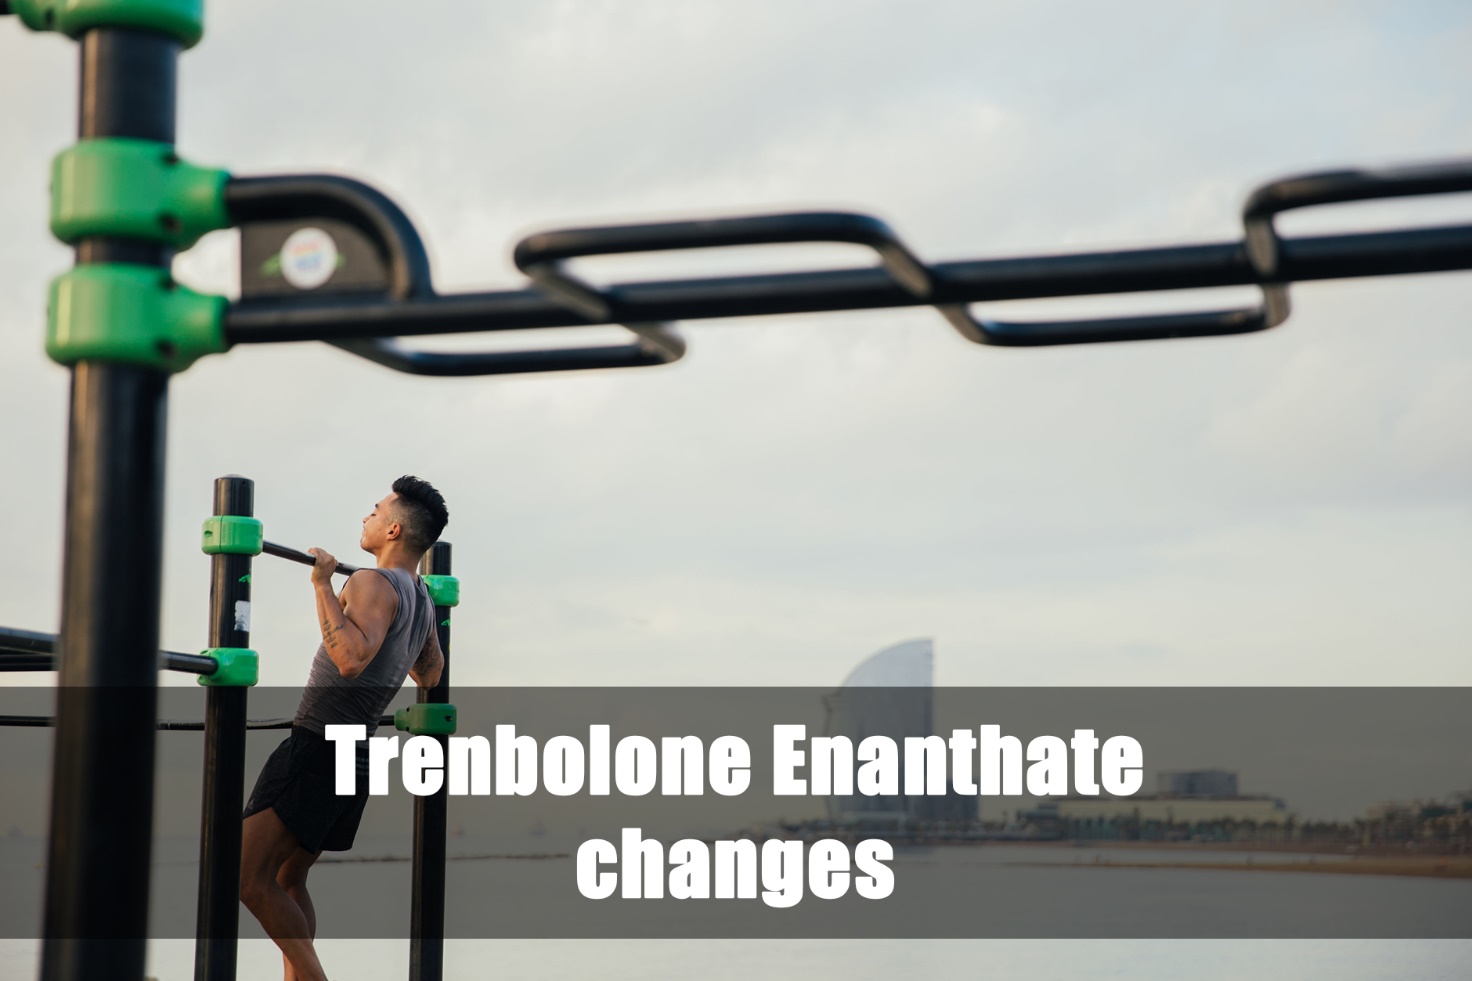 Trenbolone Enanthate changes